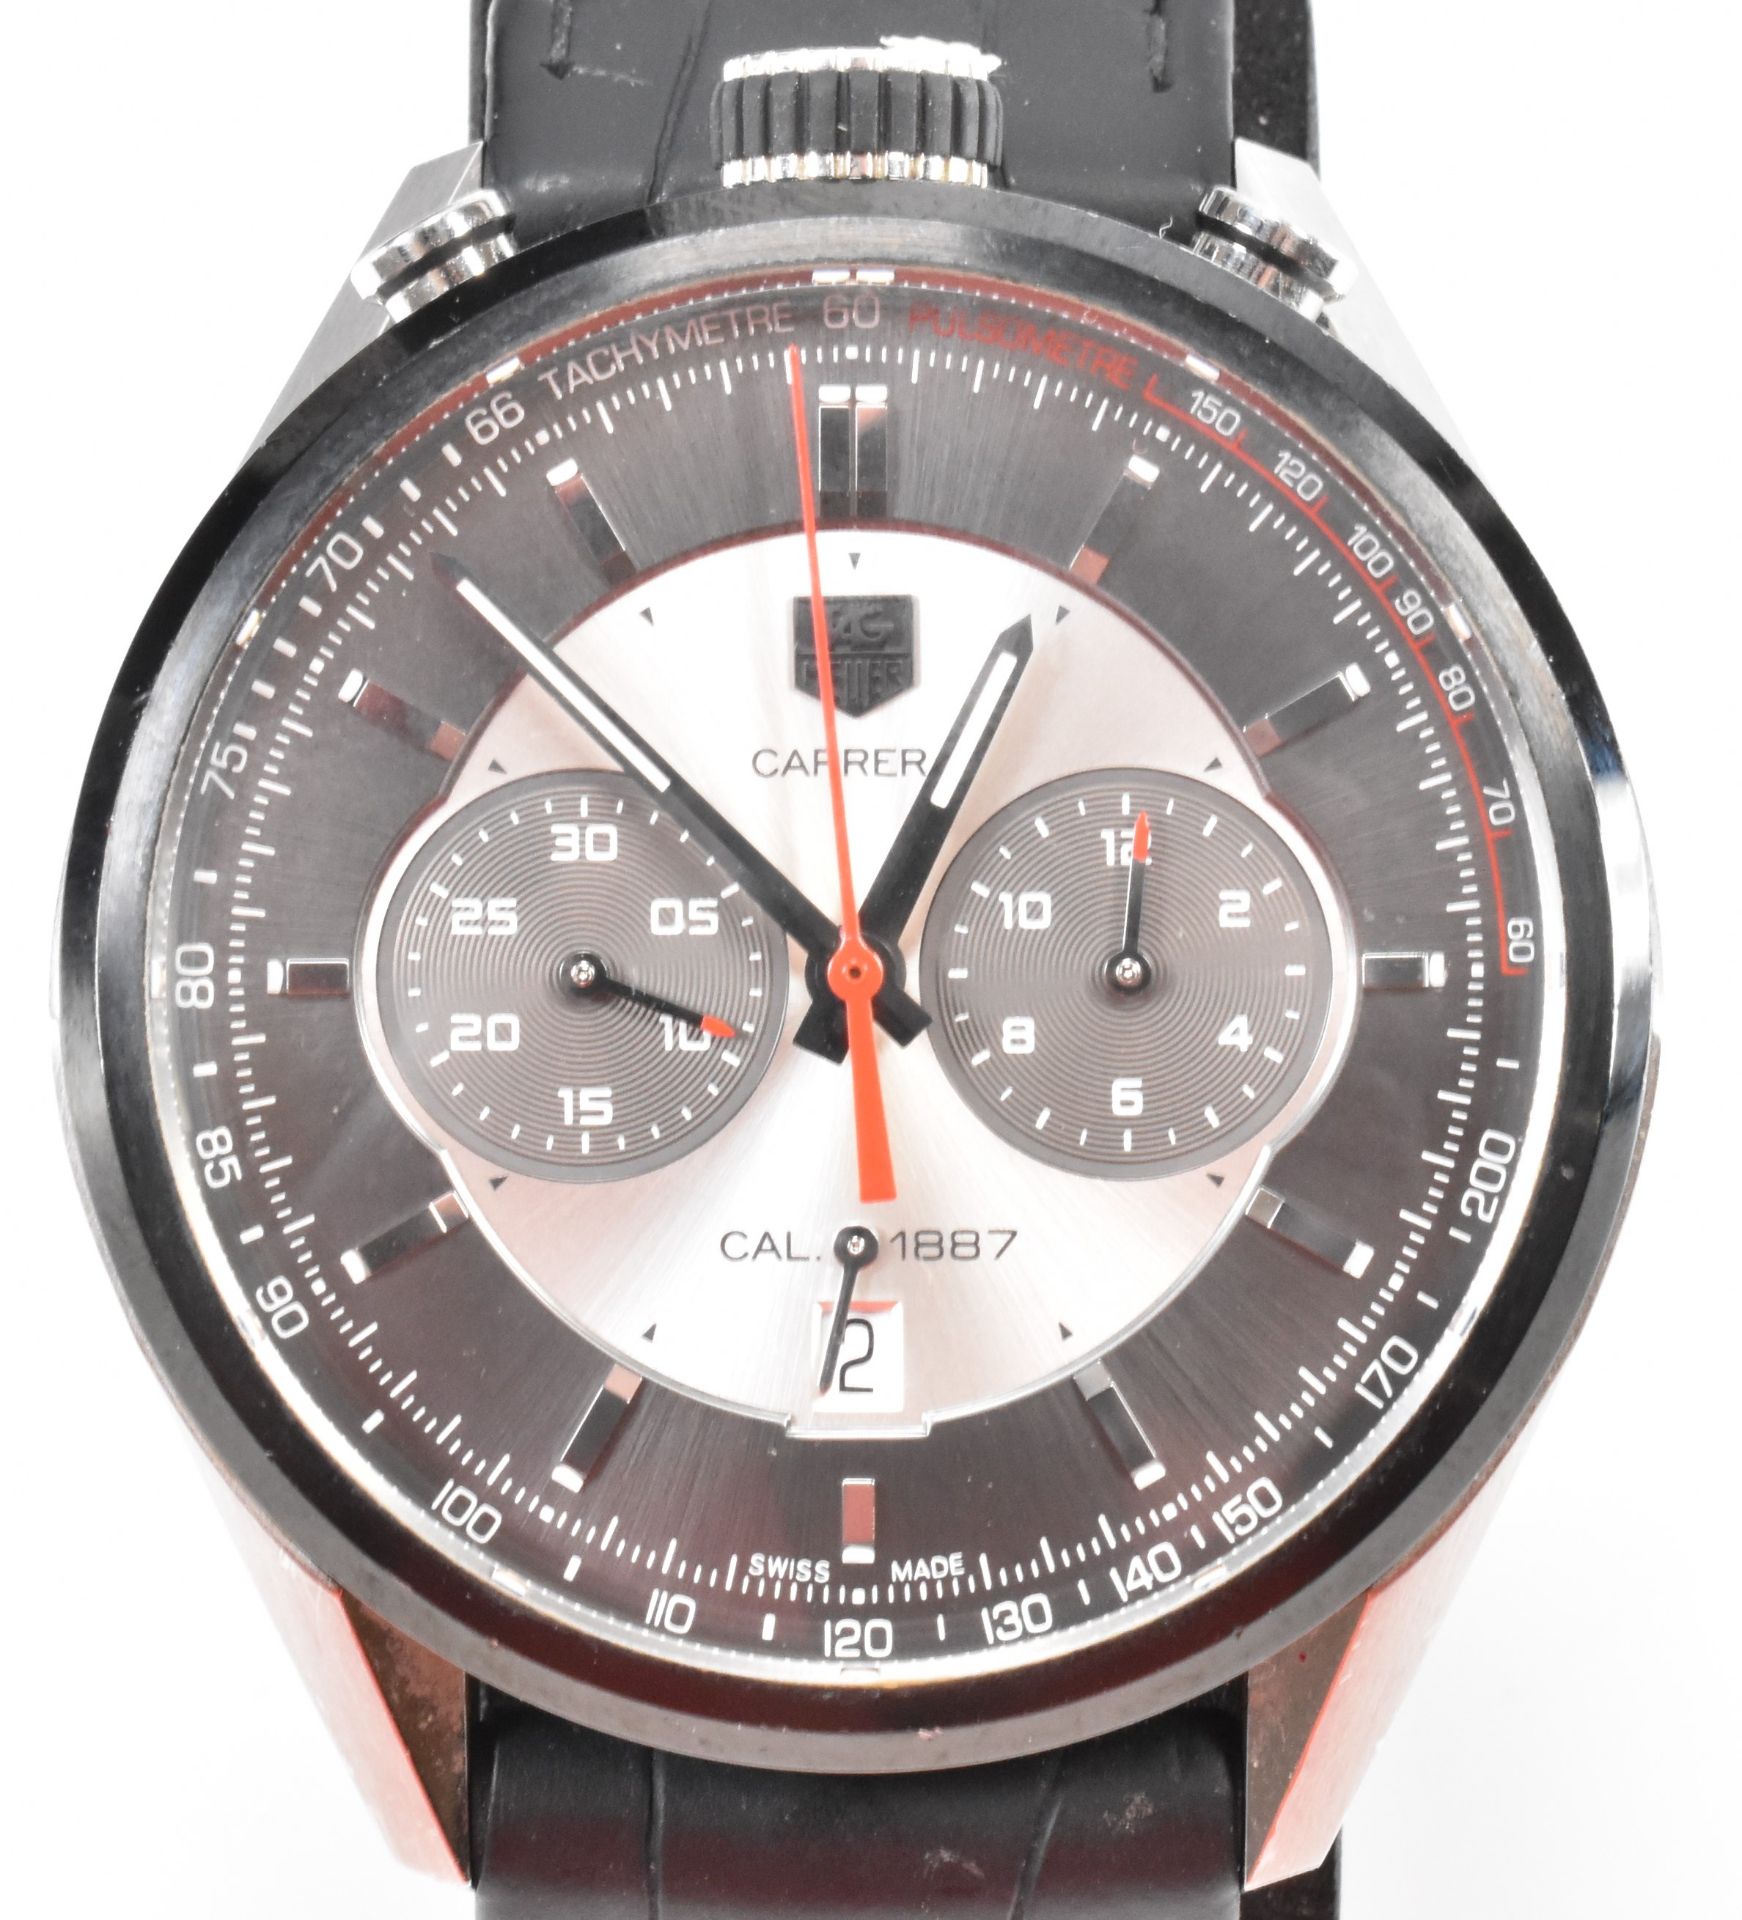 TAG HEUER CARRERA 50TH ANNIVERSARY LIMITED EDITION WATCH - Image 3 of 5